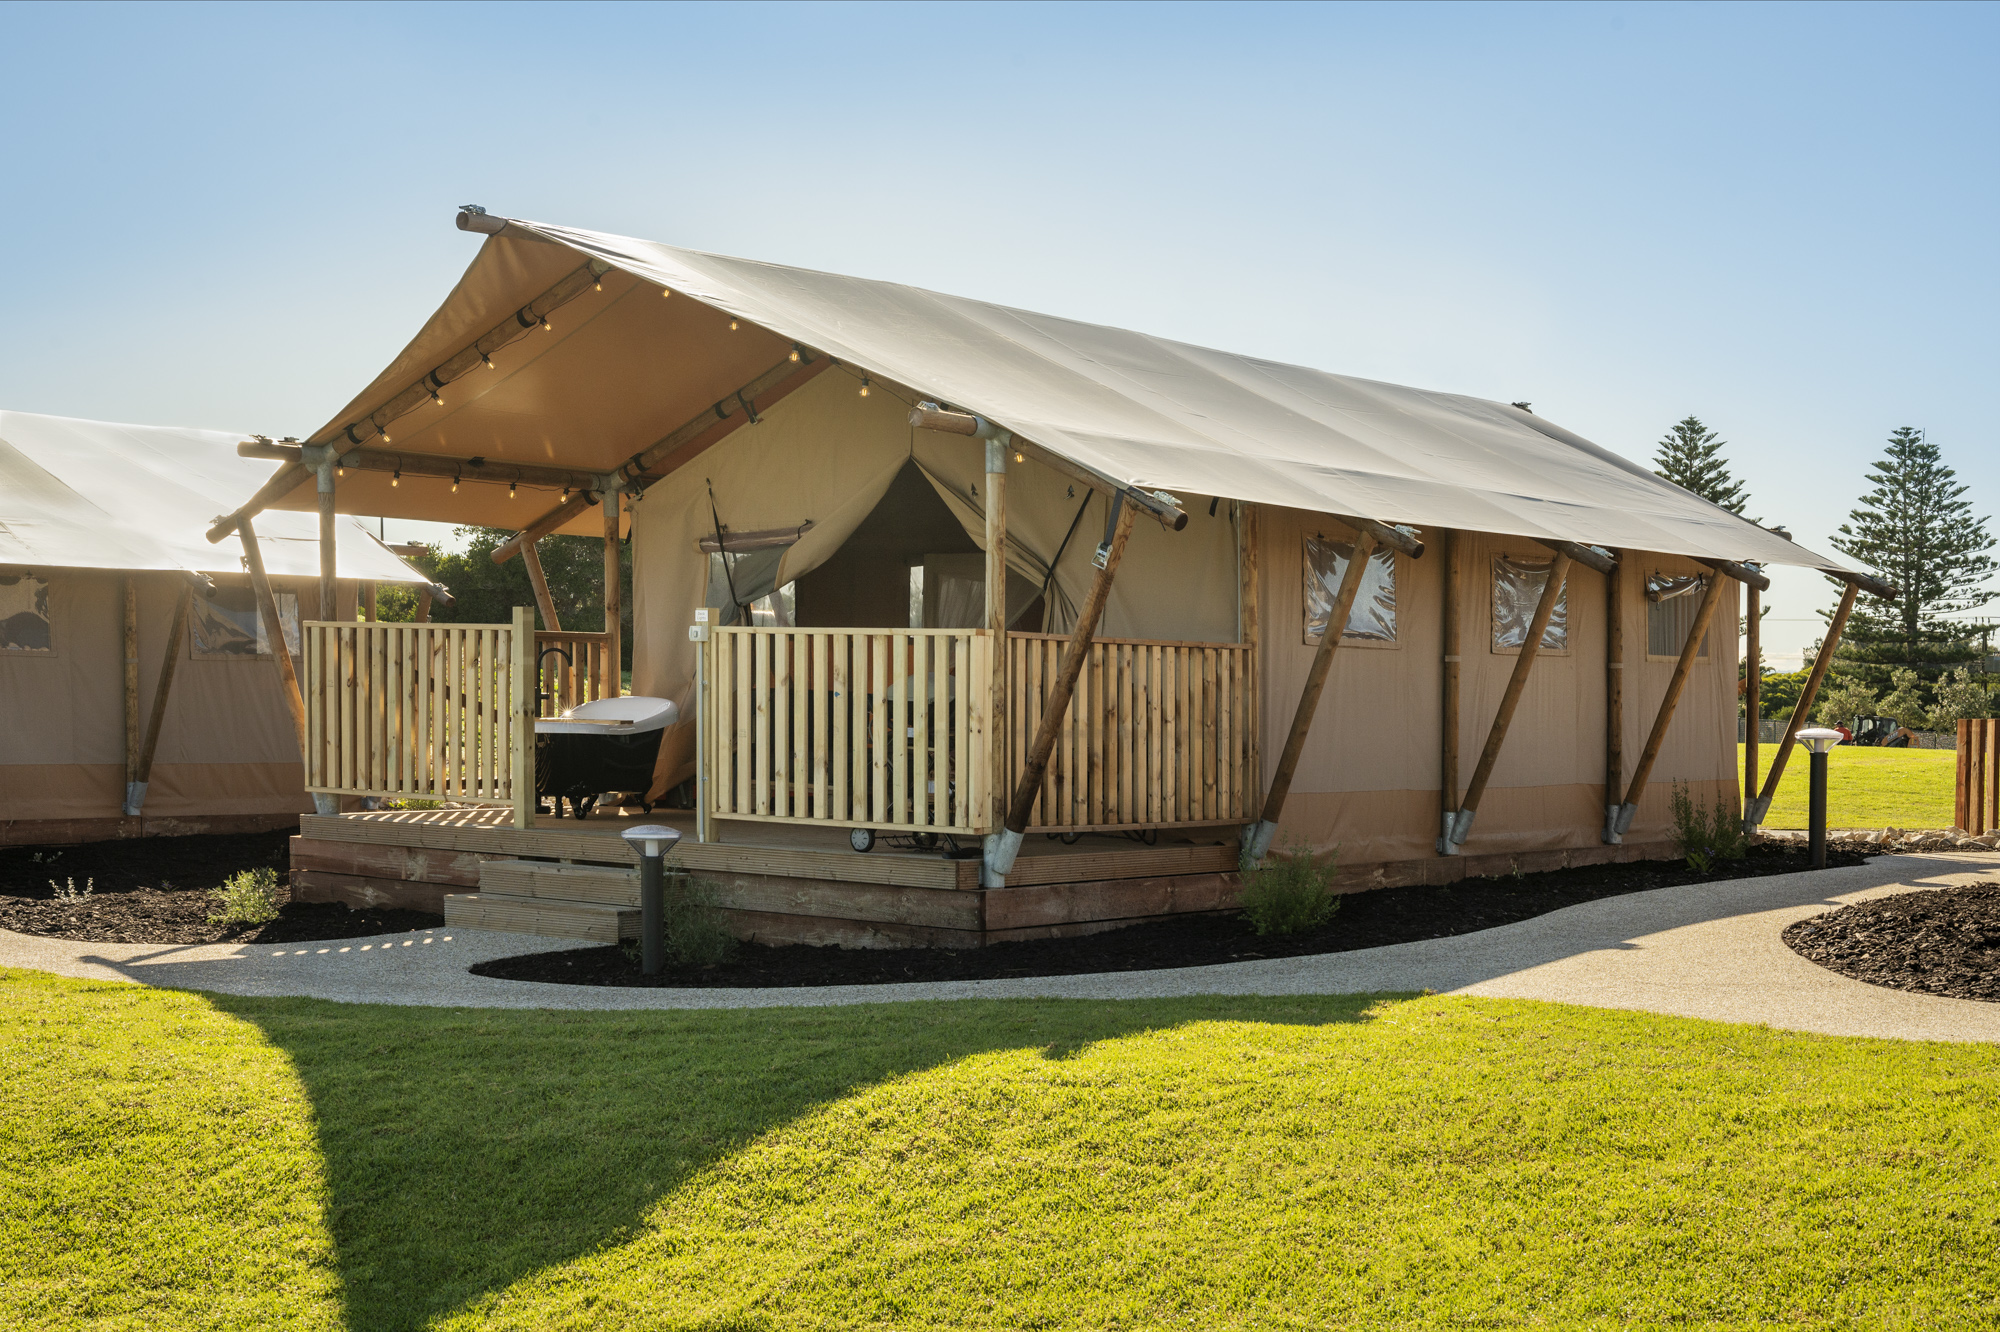 WIN 2 nights of accommodation in the newly launched Safari Tents at The Retreat West Beach Parks